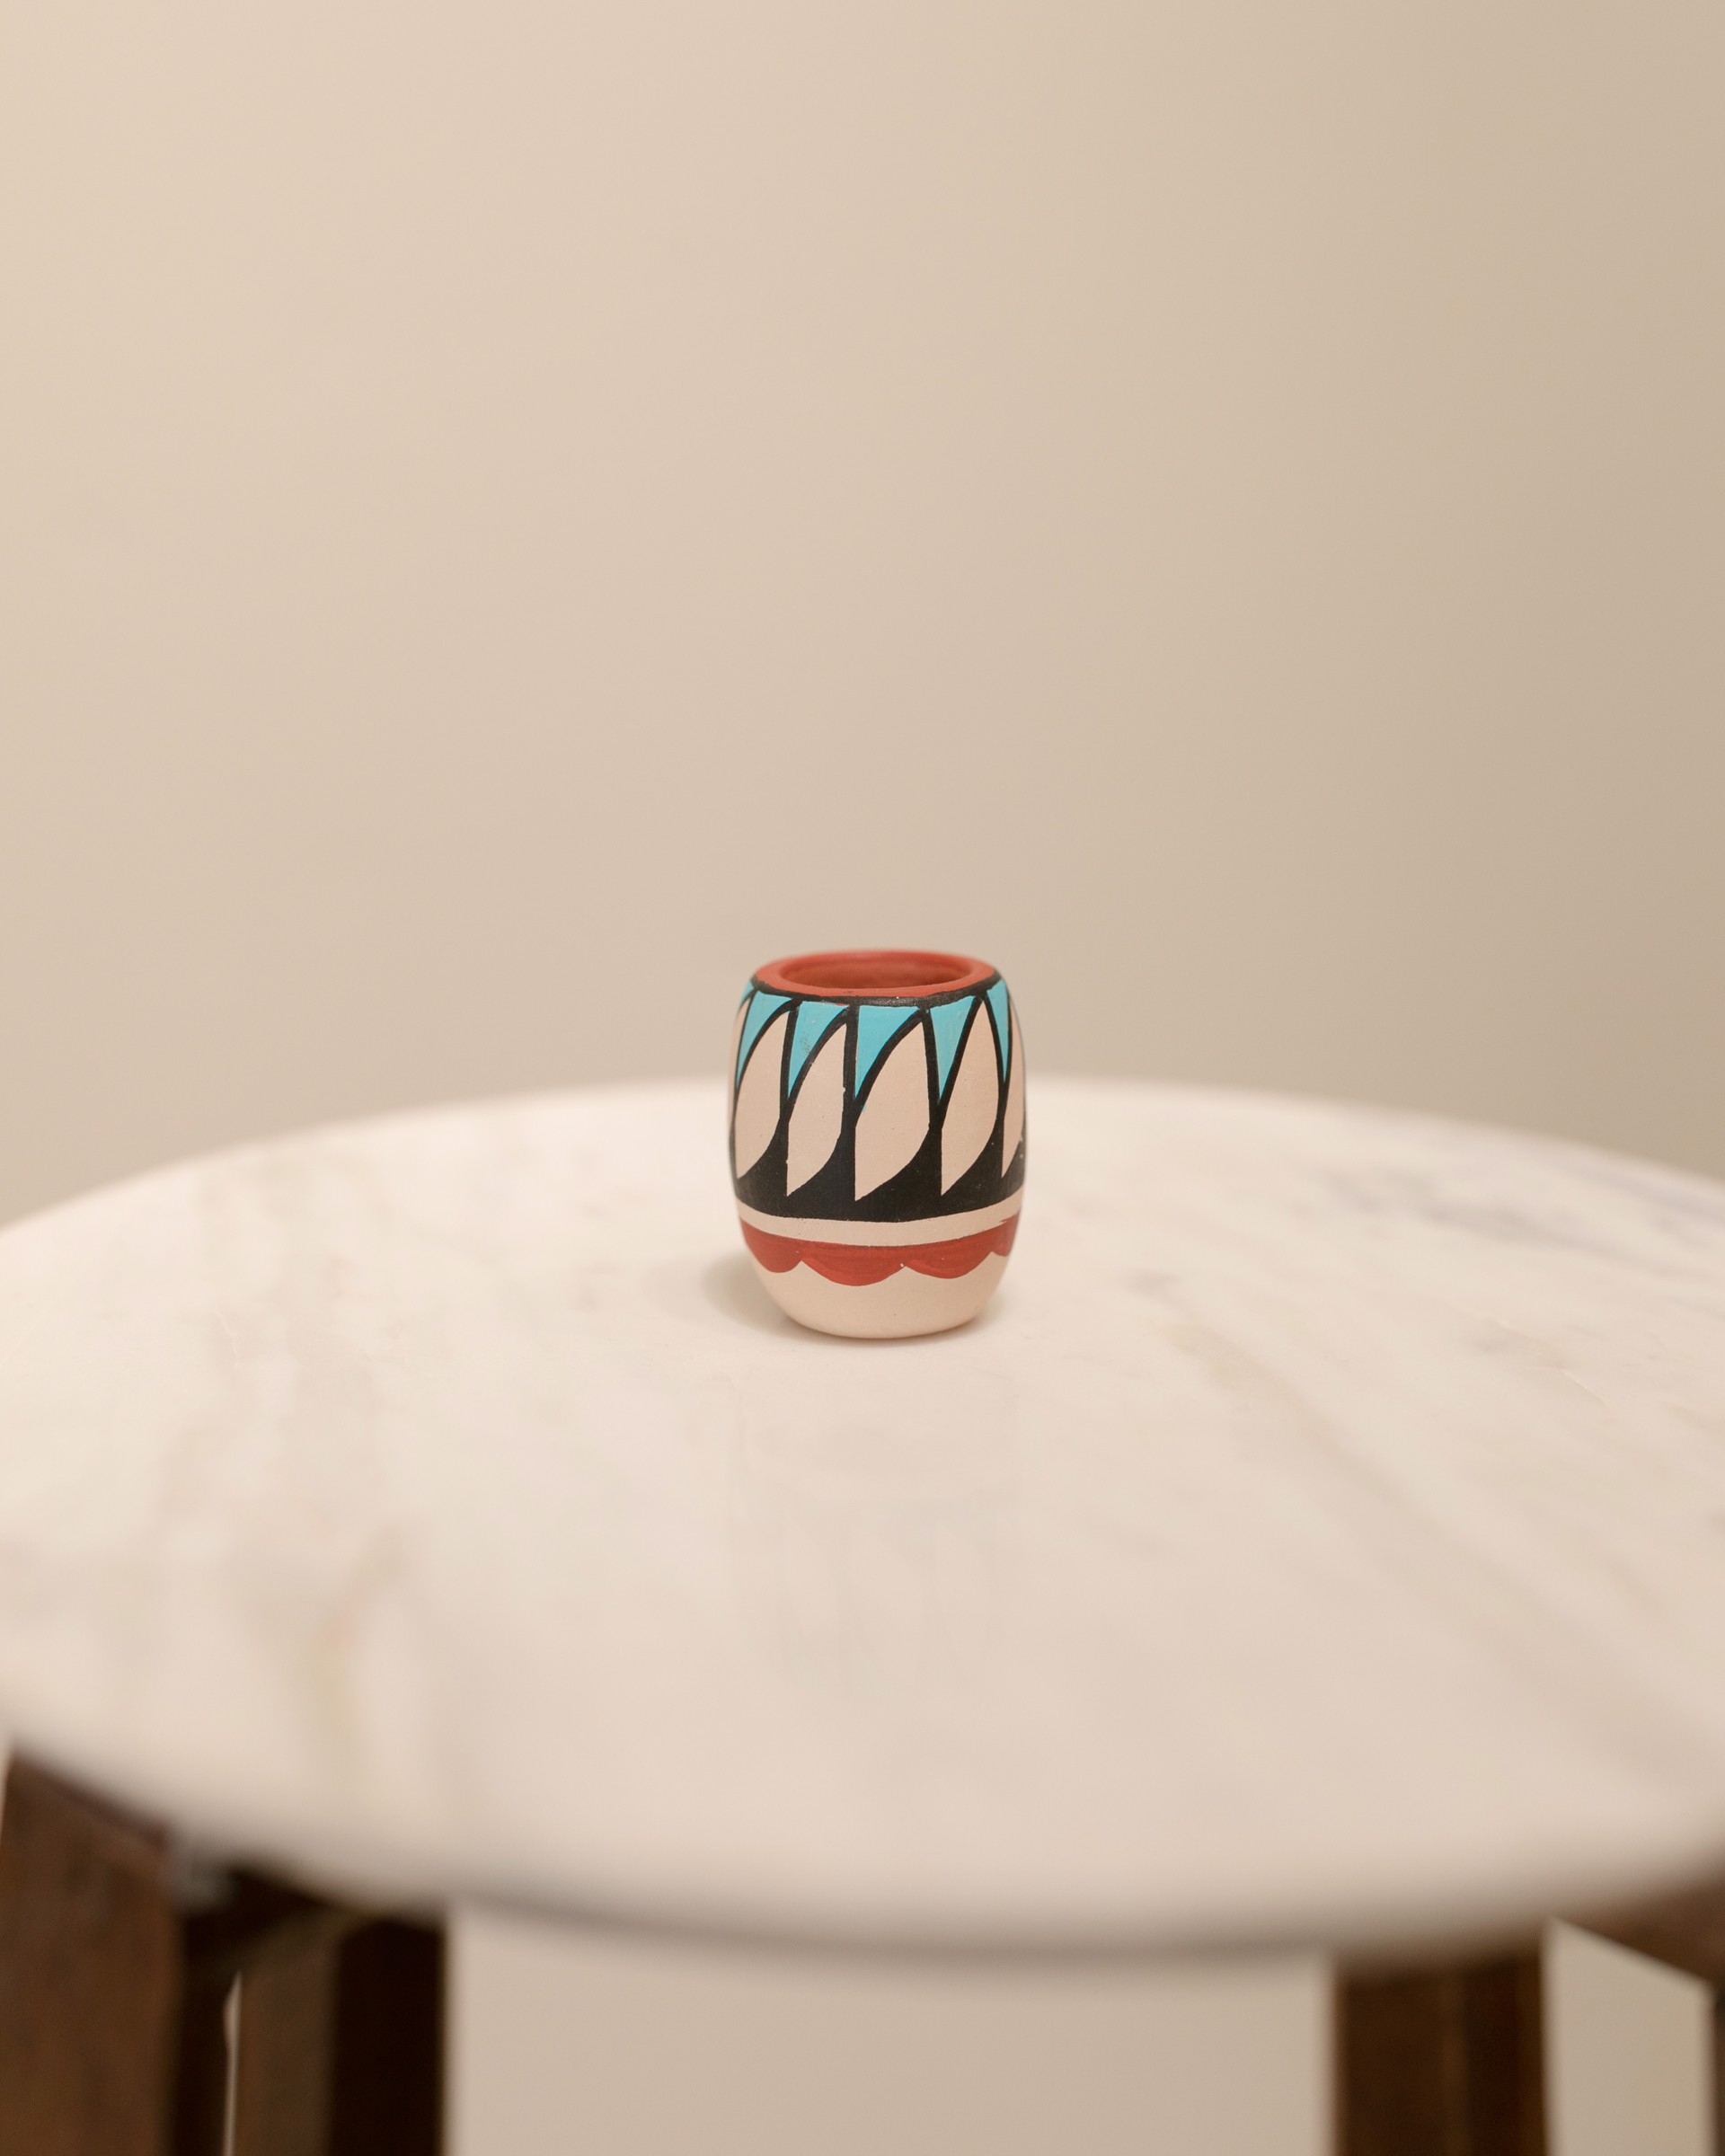 Small Brown and Turquoise Vase #11 by Richard Hendricks